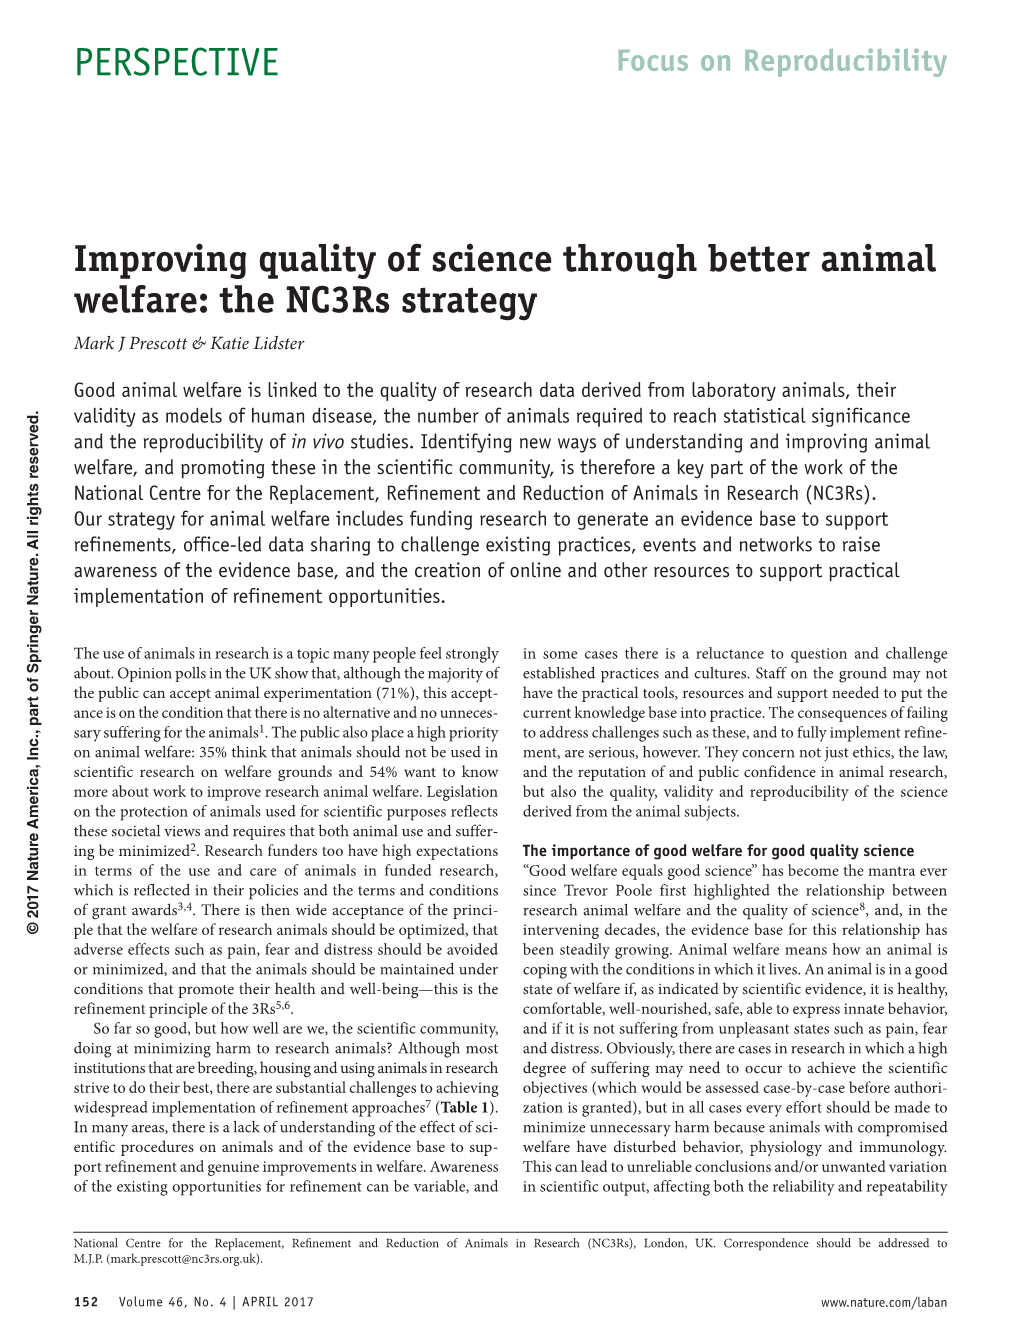 Improving Quality of Science Through Better Animal Welfare: the Nc3rs Strategy Mark J Prescott & Katie Lidster